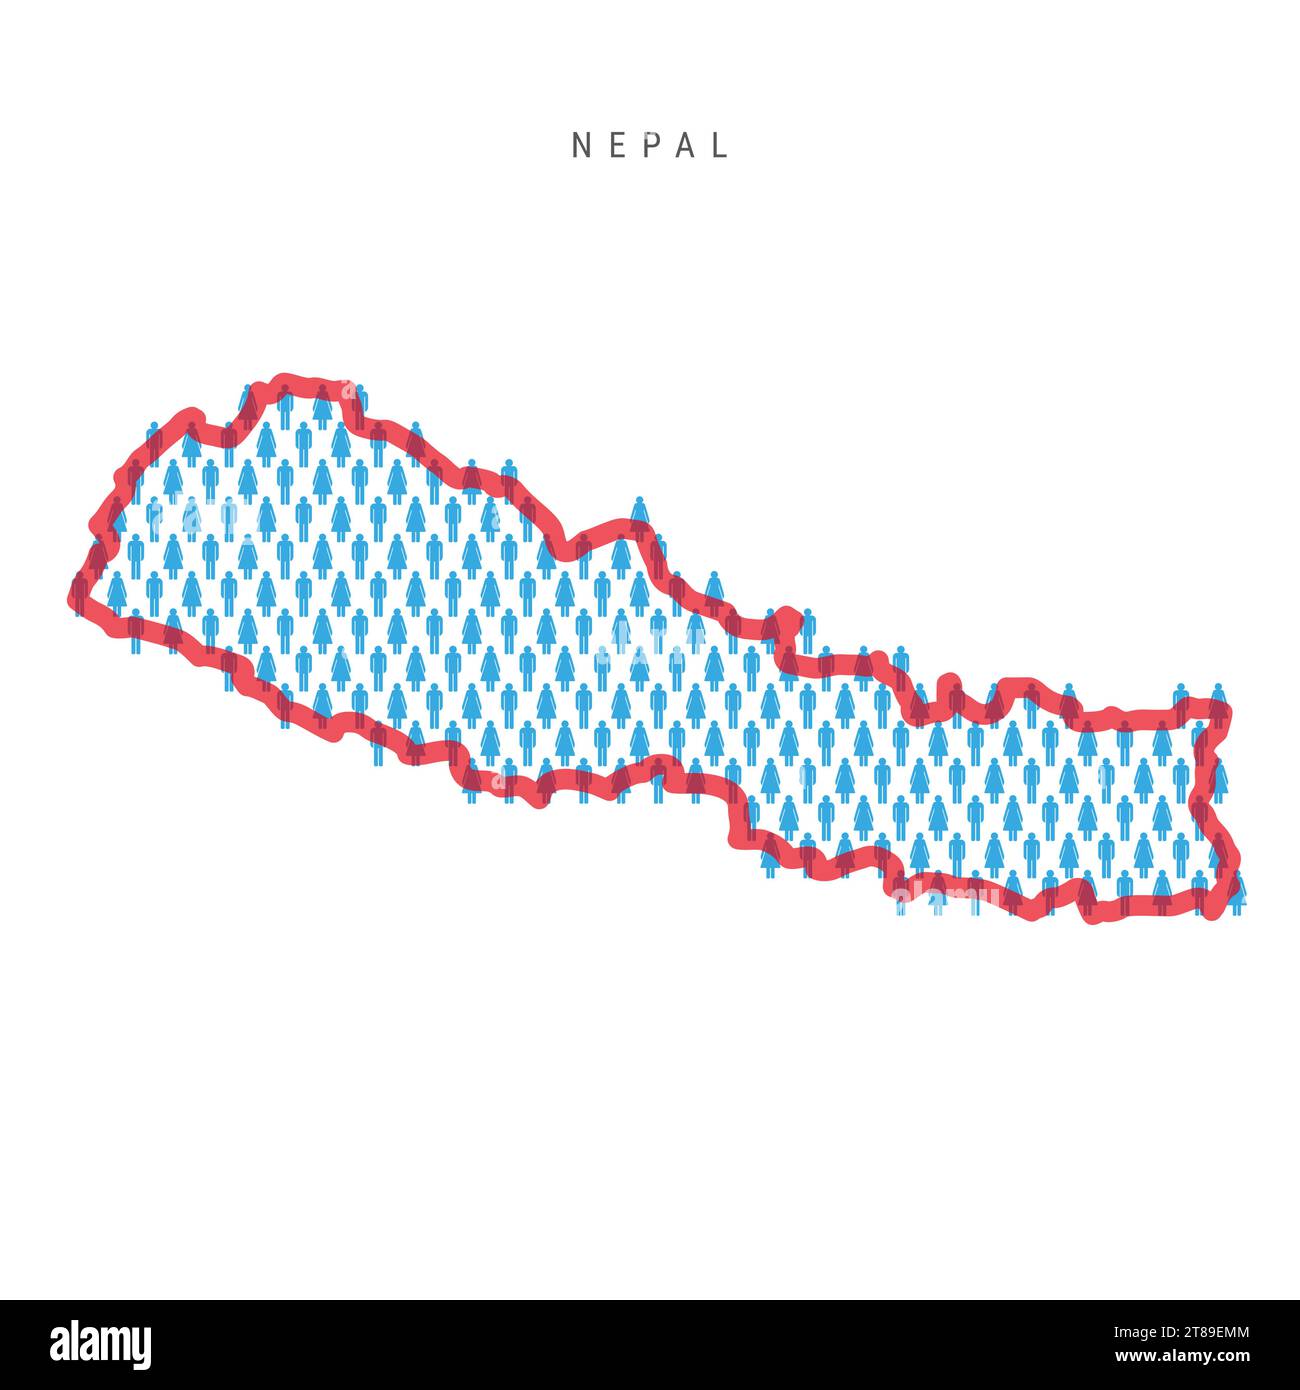 Nepal population map. Stick figures Nepali people map with bold red translucent country border. Pattern of men and women icons. Isolated vector illust Stock Vector